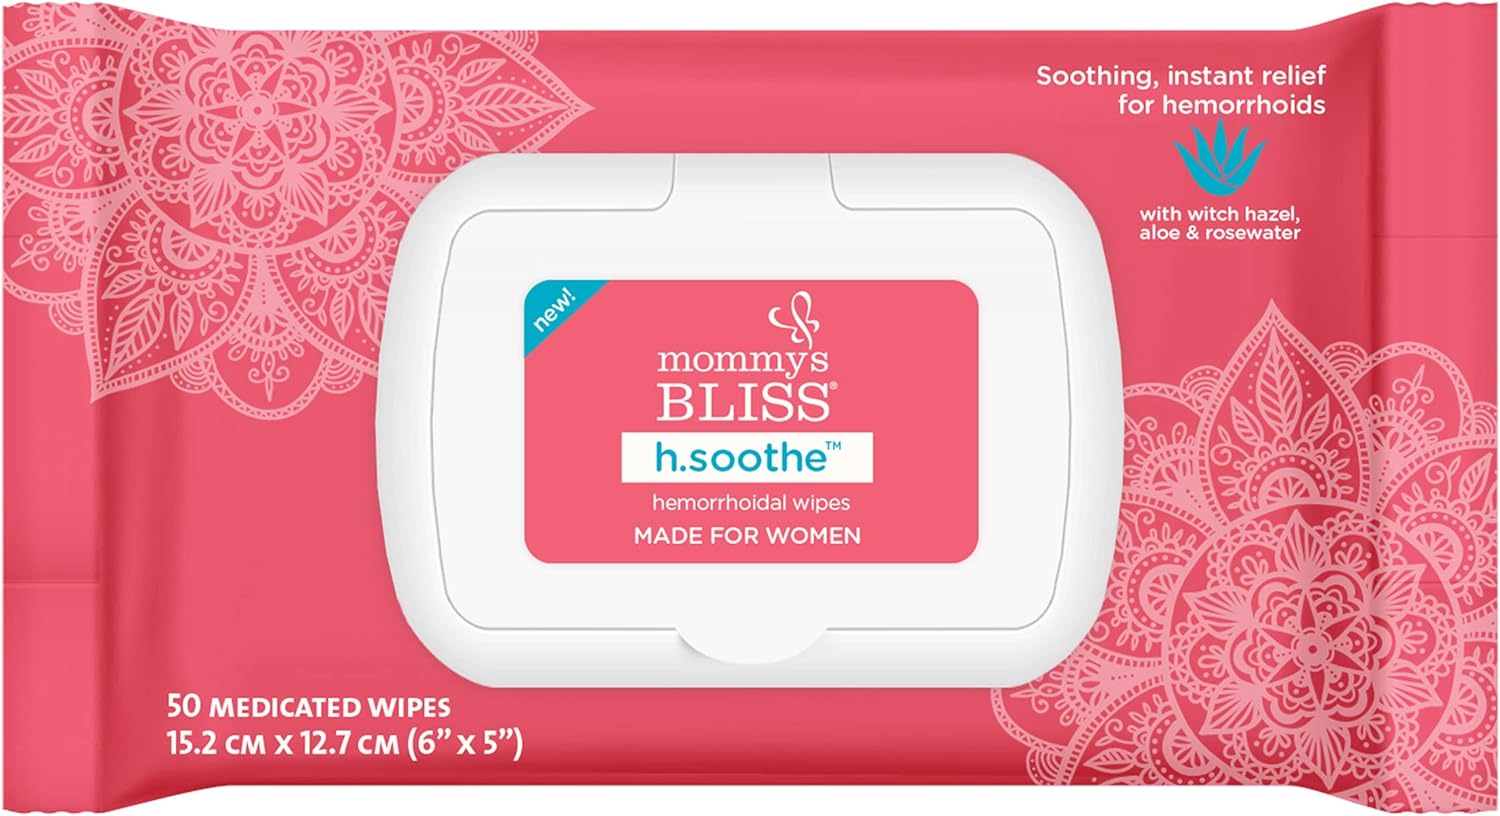 Mommy's Bliss Soothing Hemorrhoid Wipes for Women | Instant Relief wit